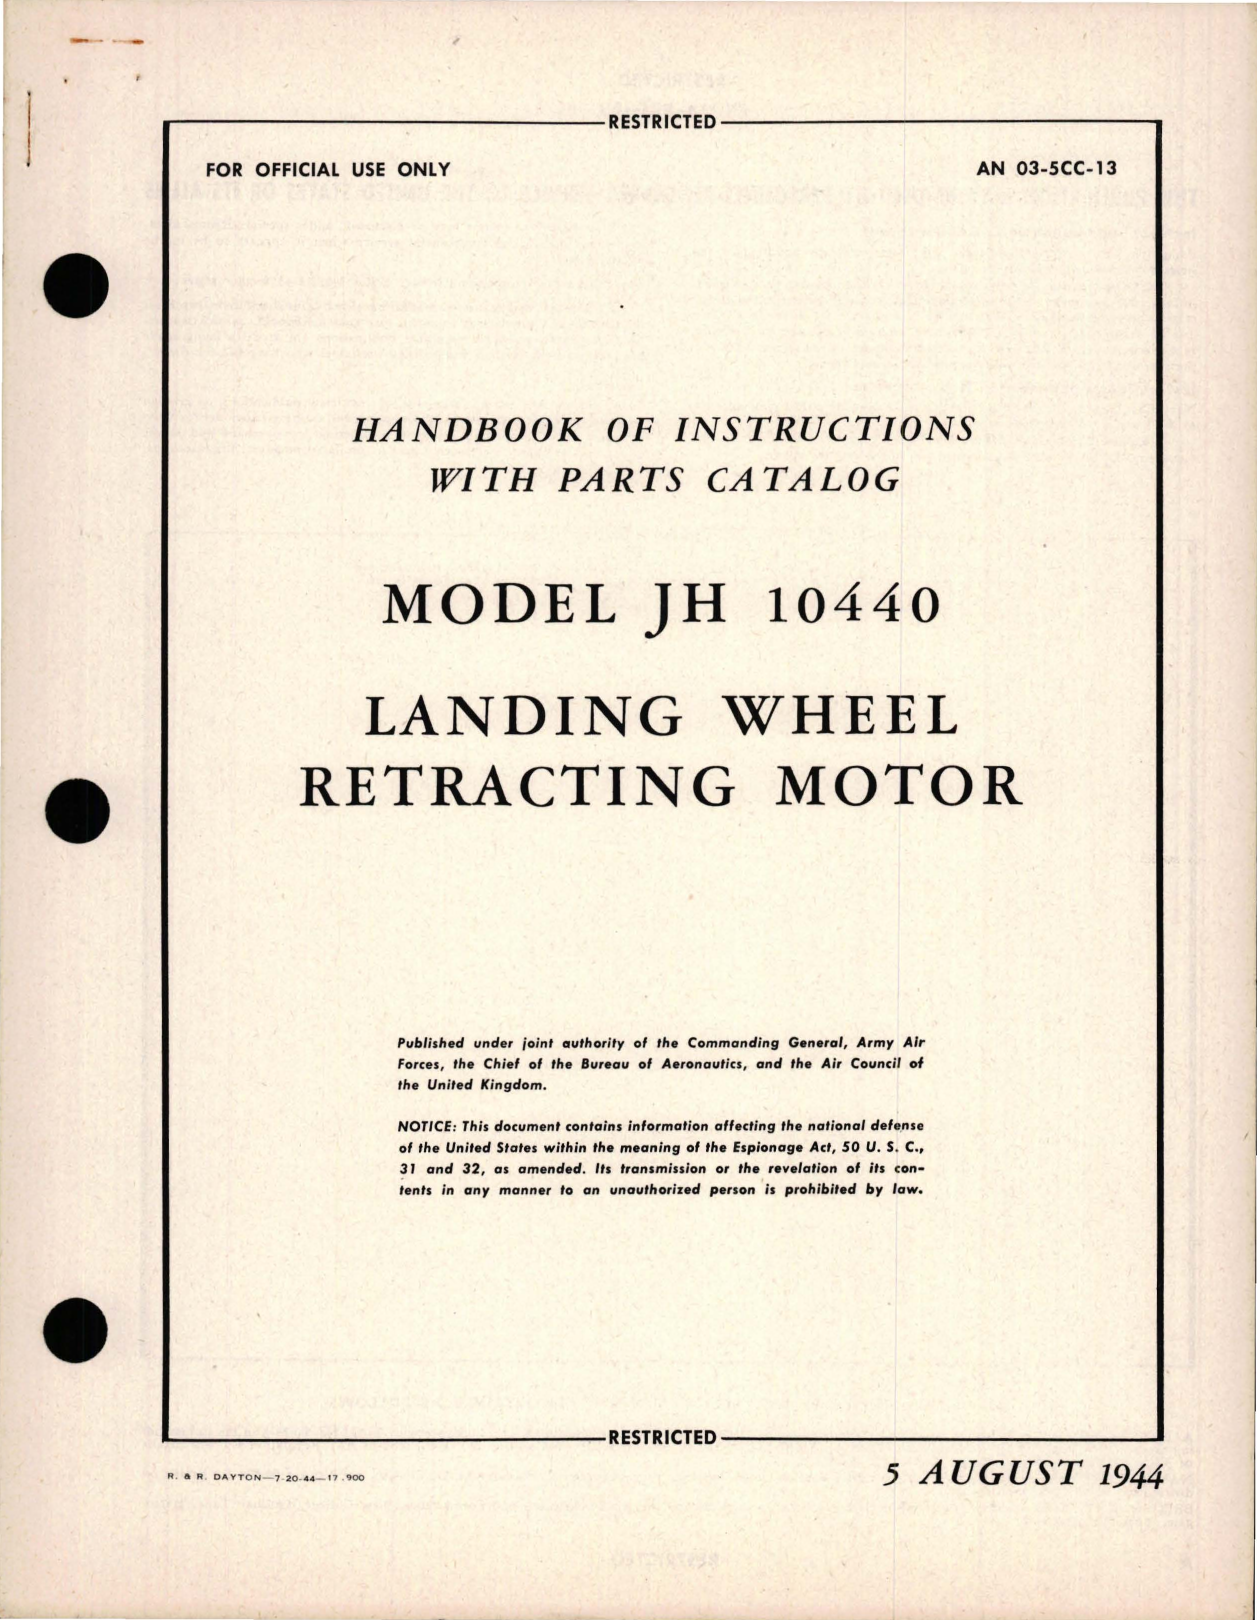 Sample page 1 from AirCorps Library document: Instructions with Parts Catalog for Landing Wheel Retracting Motor - Model JH 10440